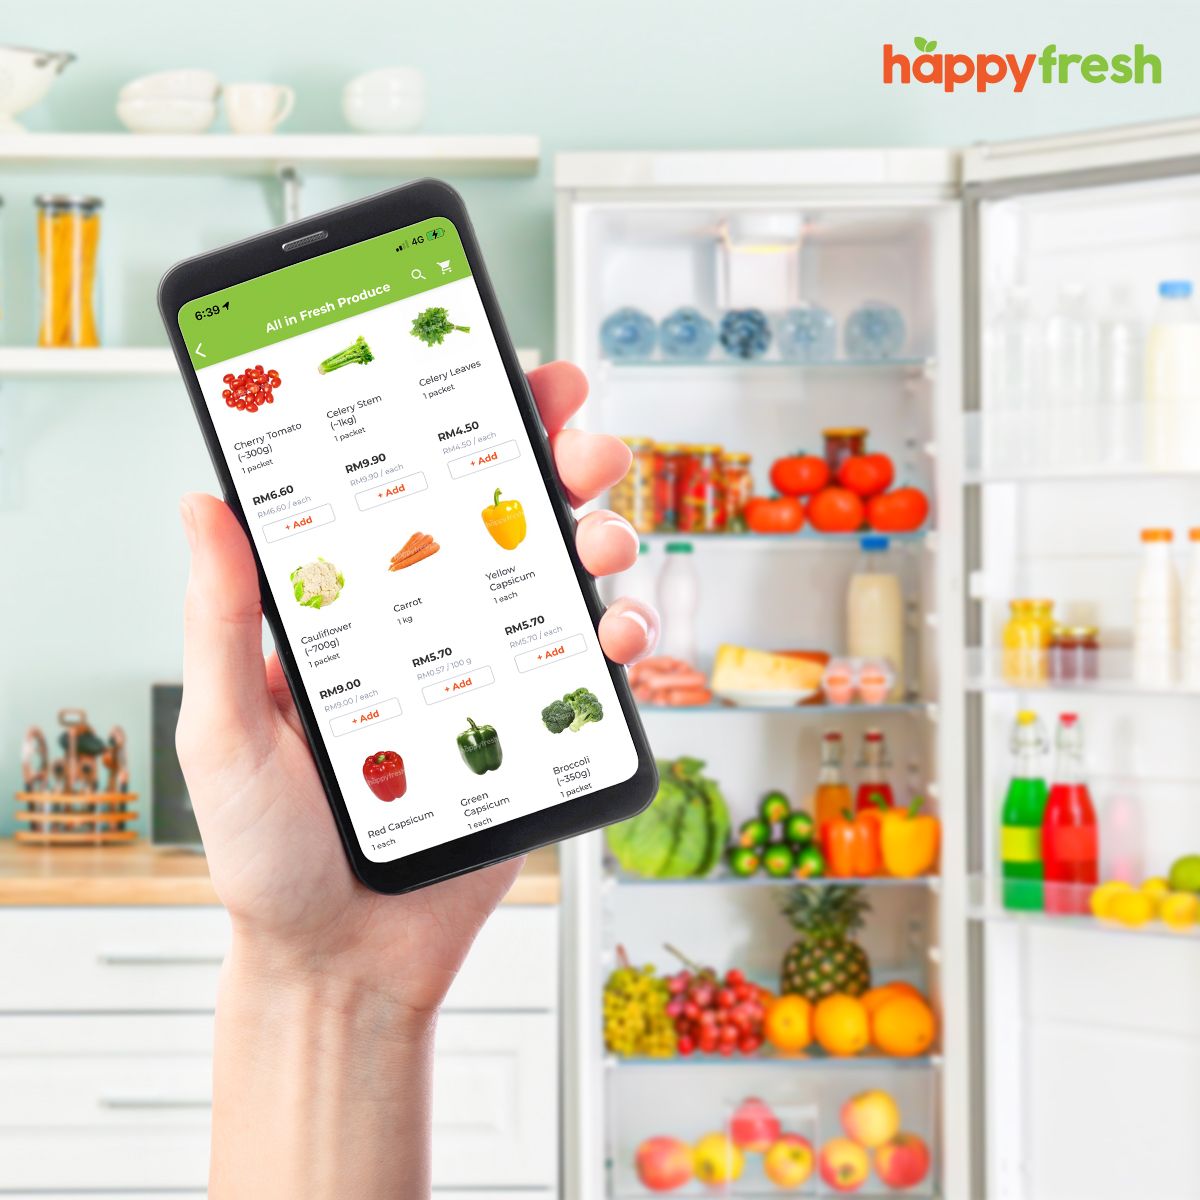 Happyfresh buying grocery through your phone from home